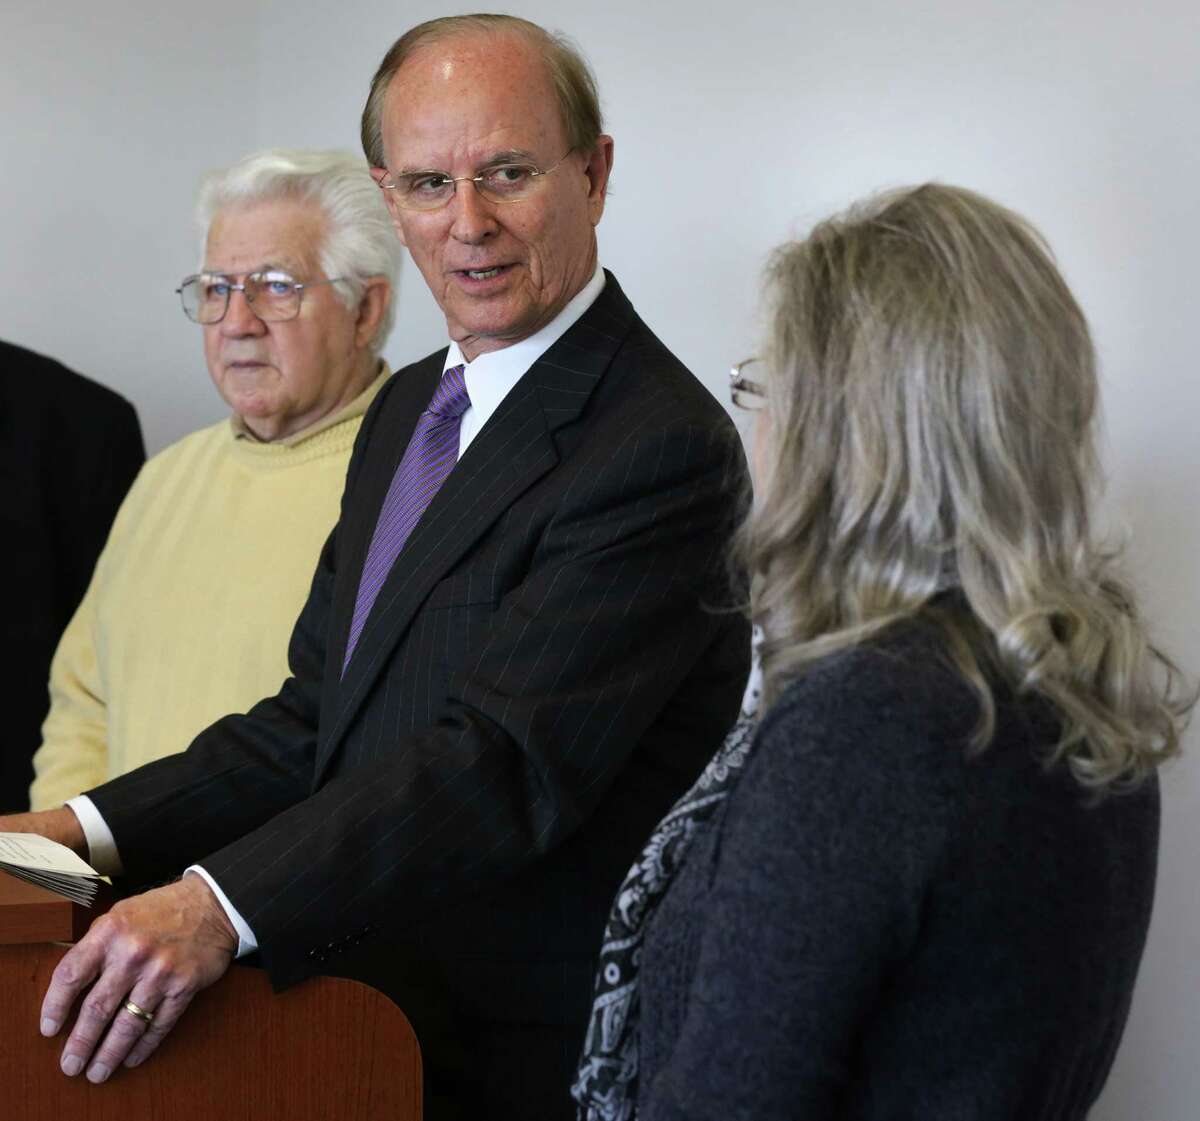 Members of the Committee to Incorporate City of Sandy Oaks, Charlotte Rabe (right) and Jim Clement (left), listen as Bexar County Judge Nelson Wolff announces the committee's filing to become a city in January. Clement was elected the new city's first mayor on Saturday.